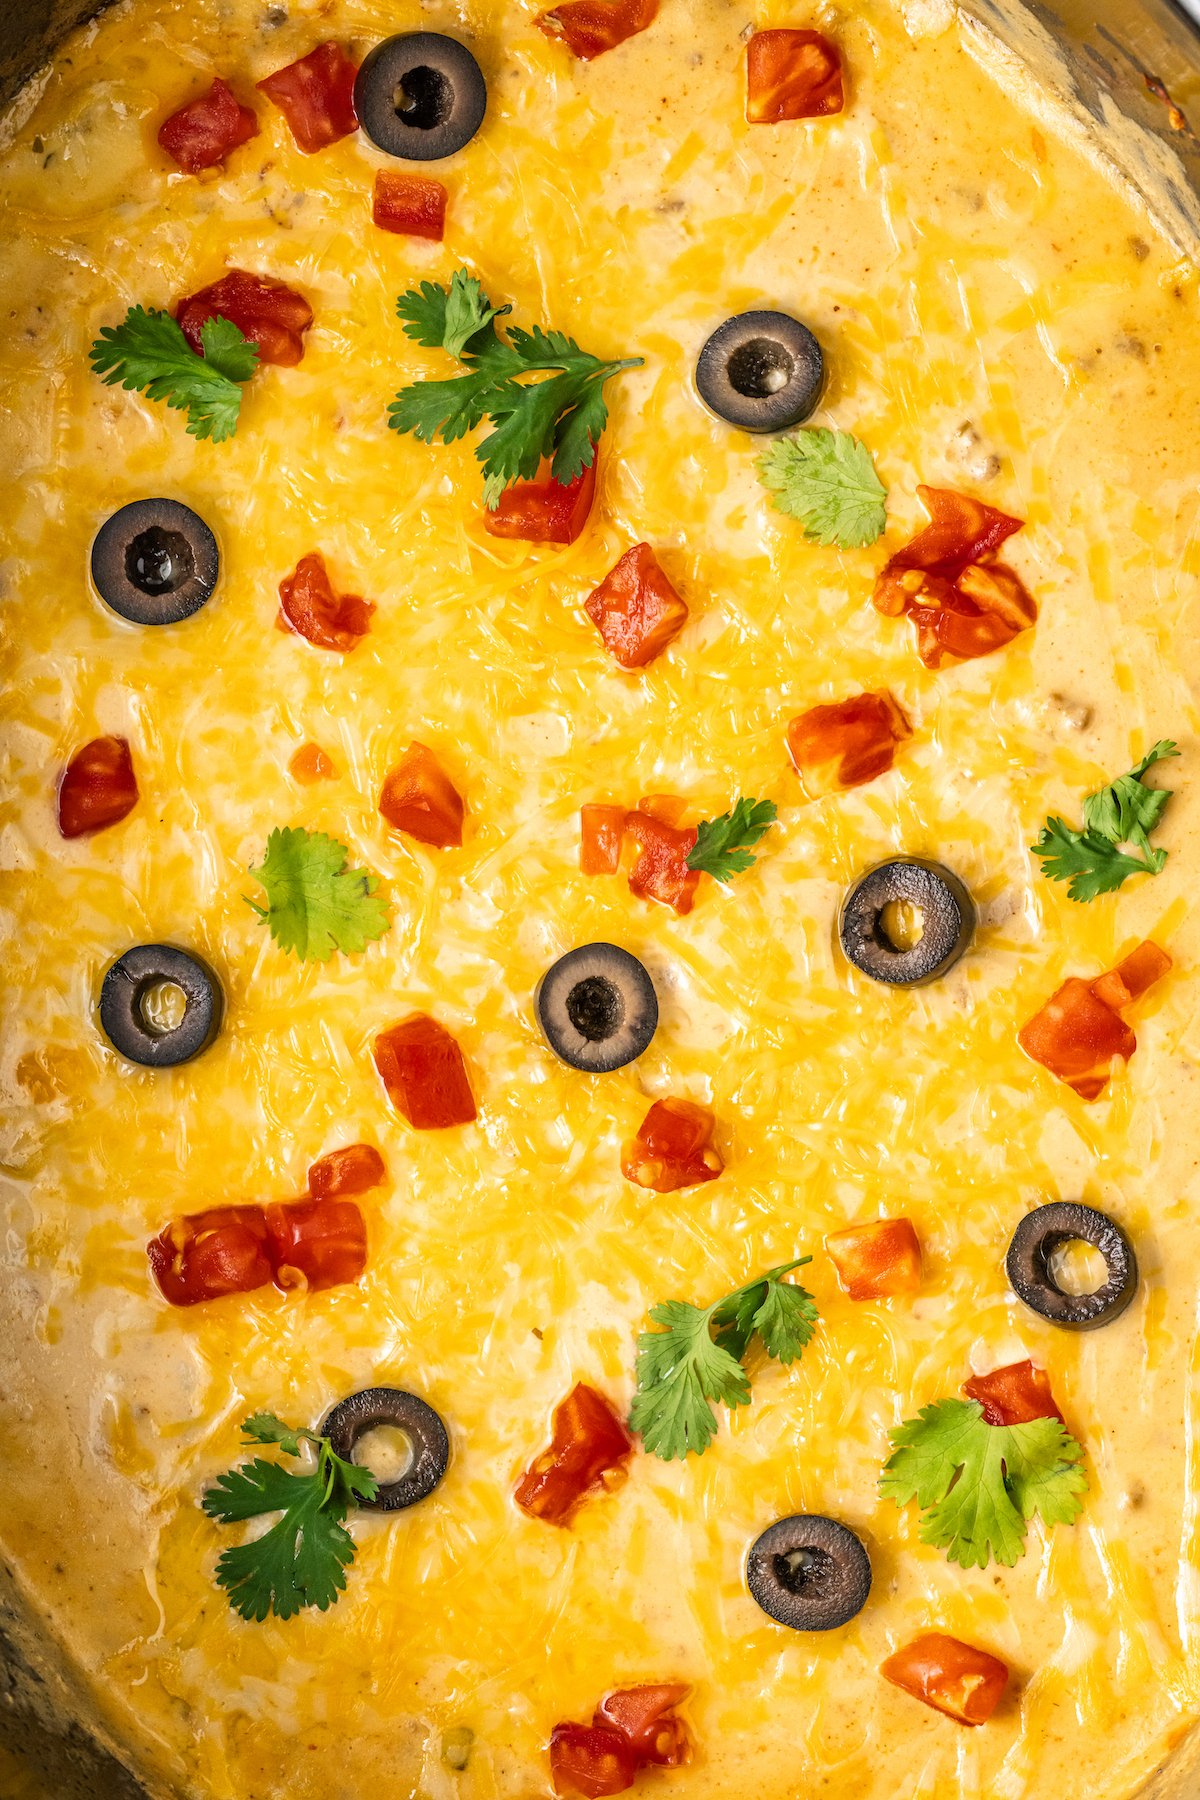 Up close view of the top of the taco dip in the crock pot featuring the shredded melted cheese, sliced olives, chopped tomato and cilantro.